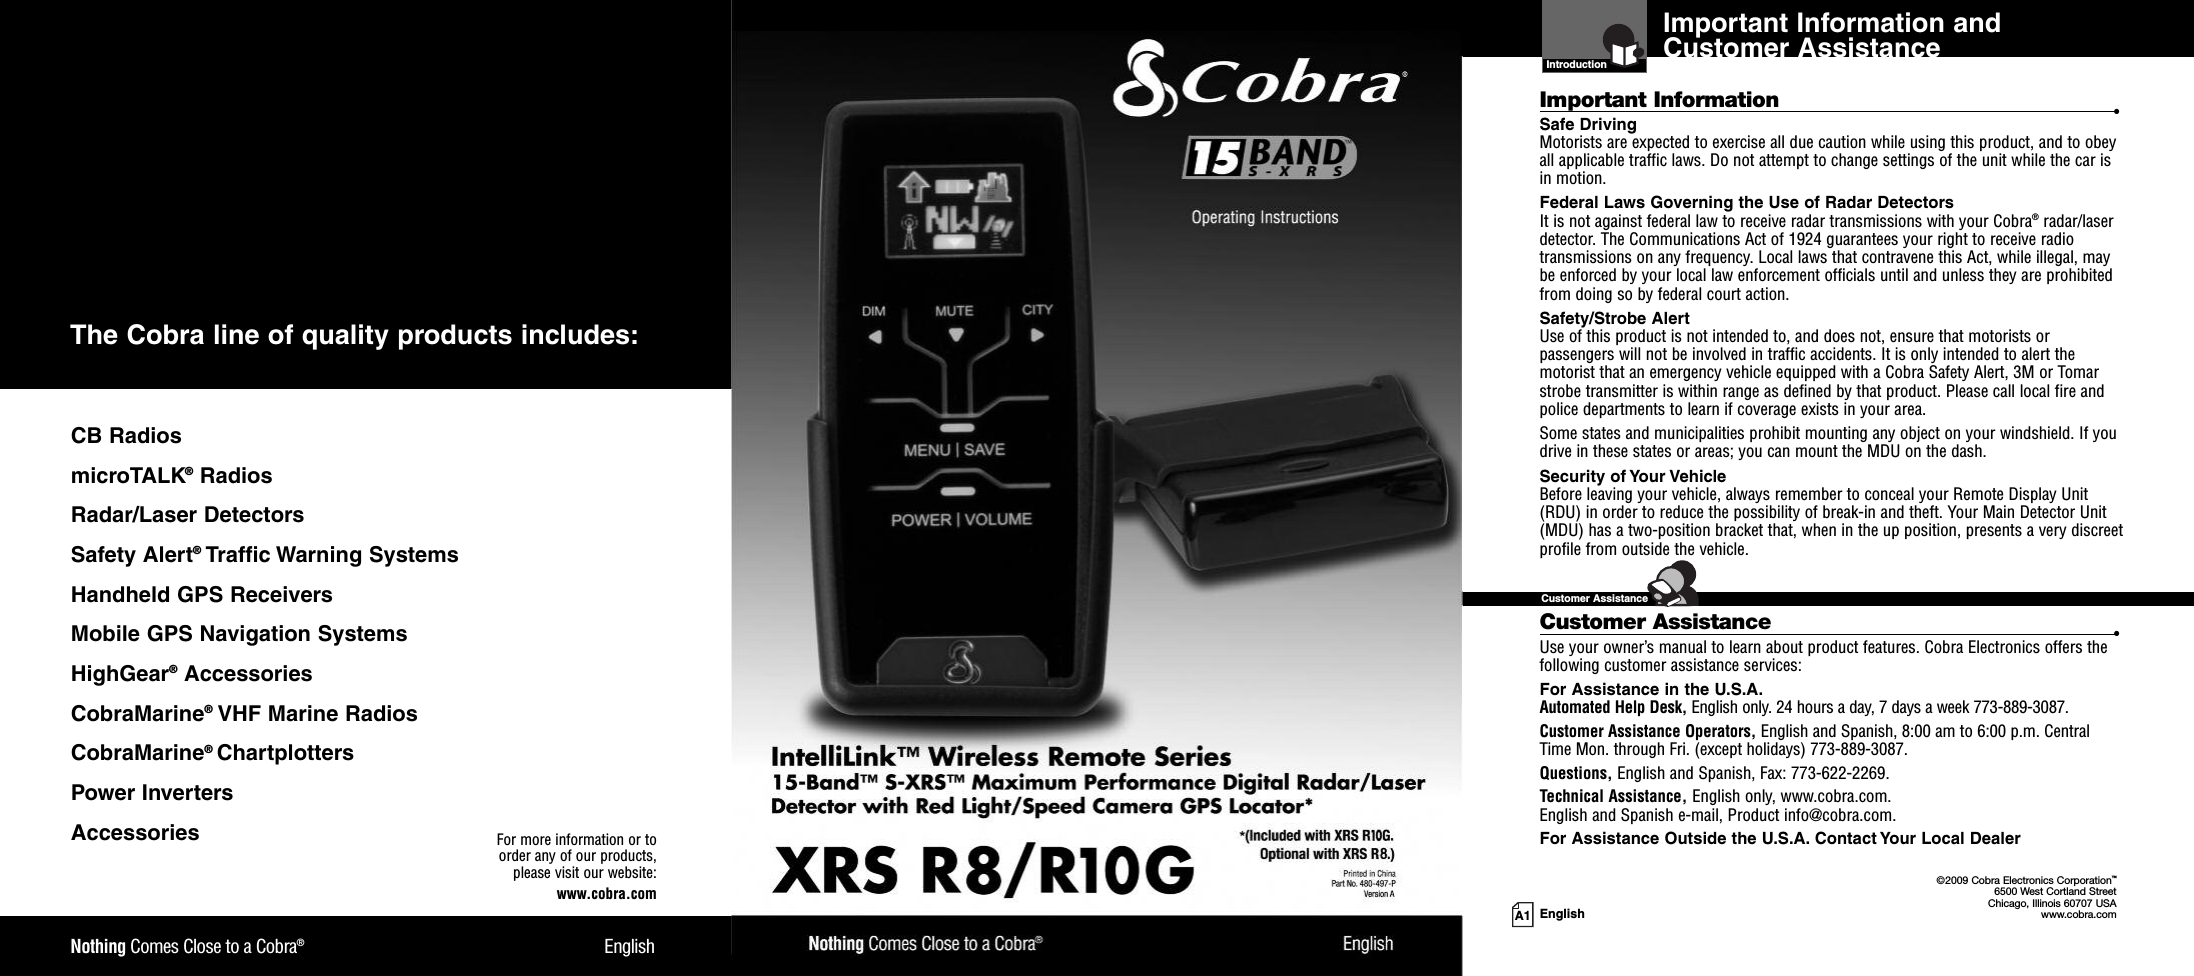 Nothing Comes Close to a Cobra®EnglishFor more information or toorder any of our products,please visit our website:www.cobra.comCB RadiosmicroTALK®RadiosRadar/Laser DetectorsSafety Alert®Traffic Warning SystemsHandheld GPS ReceiversMobile GPS Navigation SystemsHighGear®AccessoriesCobraMarine®VHF Marine RadiosCobraMarine®ChartplottersPower InvertersAccessoriesThe Cobra line of quality products includes:Important Information andCustomer AssistanceIntroductionImportant Information •Safe DrivingMotorists are expected to exercise all due caution while using this product, and to obeyall applicable traffic laws. Do not attempt to change settings of the unit while the car isin motion.Federal Laws Governing the Use of Radar DetectorsIt is not against federal law to receive radar transmissions with your Cobra®radar/laserdetector. The Communications Act of 1924 guarantees your right to receive radiotransmissions on any frequency. Local laws that contravene this Act, while illegal, maybe enforced by your local law enforcement officials until and unless they are prohibitedfrom doing so by federal court action.Safety/Strobe AlertUse of this product is not intended to, and does not, ensure that motorists orpassengers will not be involved in traffic accidents. It is only intended to alert themotorist that an emergency vehicle equipped with a Cobra Safety Alert, 3M or Tomarstrobe transmitter is within range as defined by that product. Please call local fire andpolice departments to learn if coverage exists in your area.Some states and municipalities prohibit mounting any object on your windshield. If youdrive in these states or areas; you can mount the MDU on the dash.Security of Your VehicleBefore leaving your vehicle, always remember to conceal your Remote Display Unit(RDU) in order to reduce the possibility of break-in and theft. Your Main Detector Unit(MDU) has a two-position bracket that, when in the up position, presents a very discreetprofile from outside the vehicle.Customer Assistance •Use your owner’s manual to learn about product features. Cobra Electronics offers thefollowing customer assistance services:For Assistance in the U.S.A.Automated Help Desk, English only. 24 hours a day, 7 days a week 773-889-3087.Customer Assistance Operators, English and Spanish, 8:00 am to 6:00 p.m. CentralTime Mon. through Fri. (except holidays) 773-889-3087.Questions, English and Spanish, Fax: 773-622-2269.Technical Assistance, English only, www.cobra.com.English and Spanish e-mail, Product info@cobra.com.For Assistance Outside the U.S.A. Contact Your Local Dealer©2009 Cobra Electronics Corporation™6500 West Cortland StreetChicago, Illinois 60707 USAwww.cobra.comCustomer AssistanceA1 English